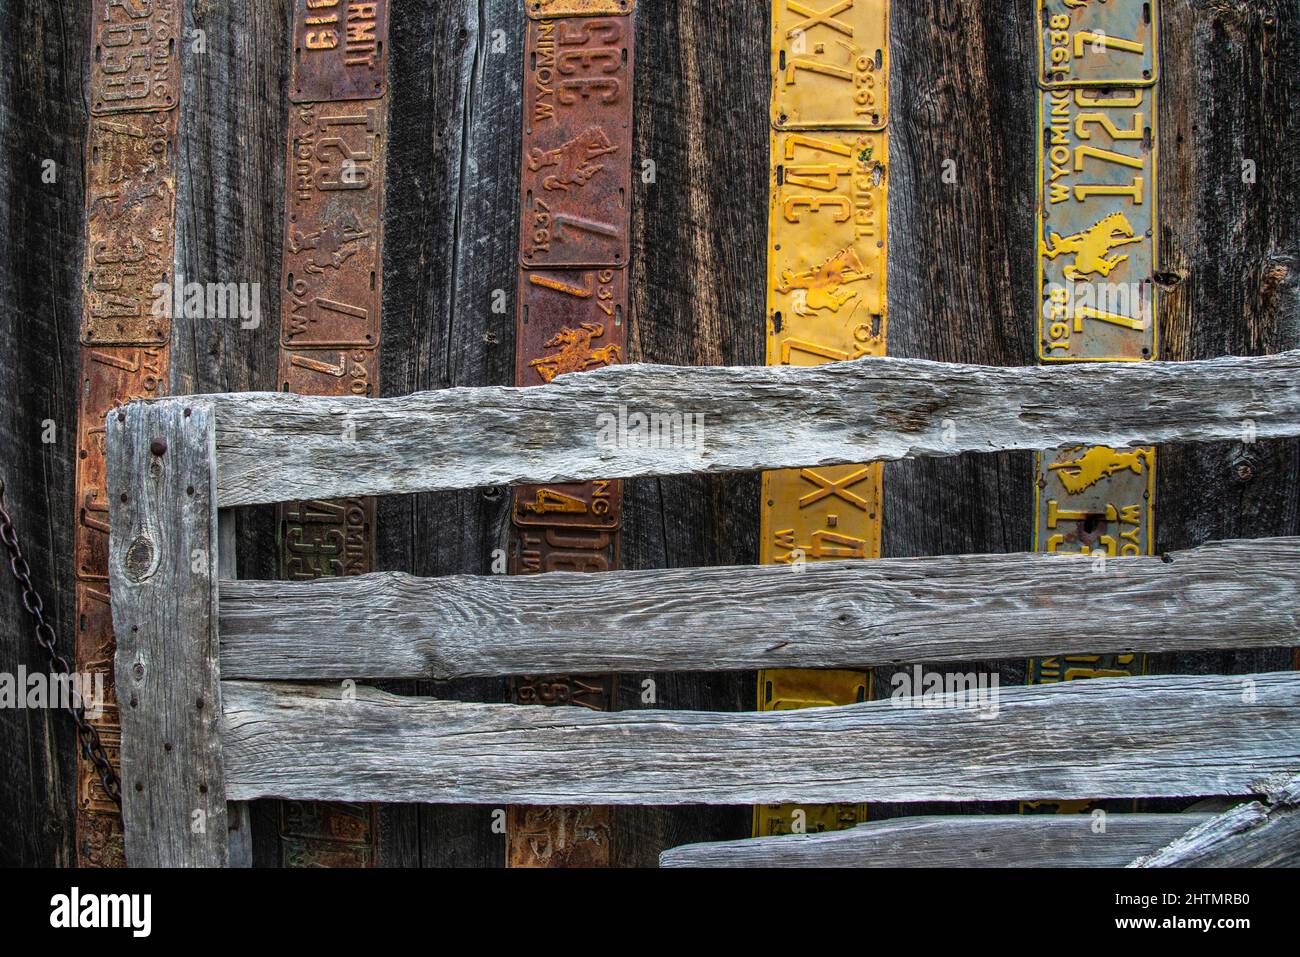 old weathered wooden barn with antique Wyoming license plates nailed to the wall for protection and decoration with the old coral gate by the wall Stock Photo